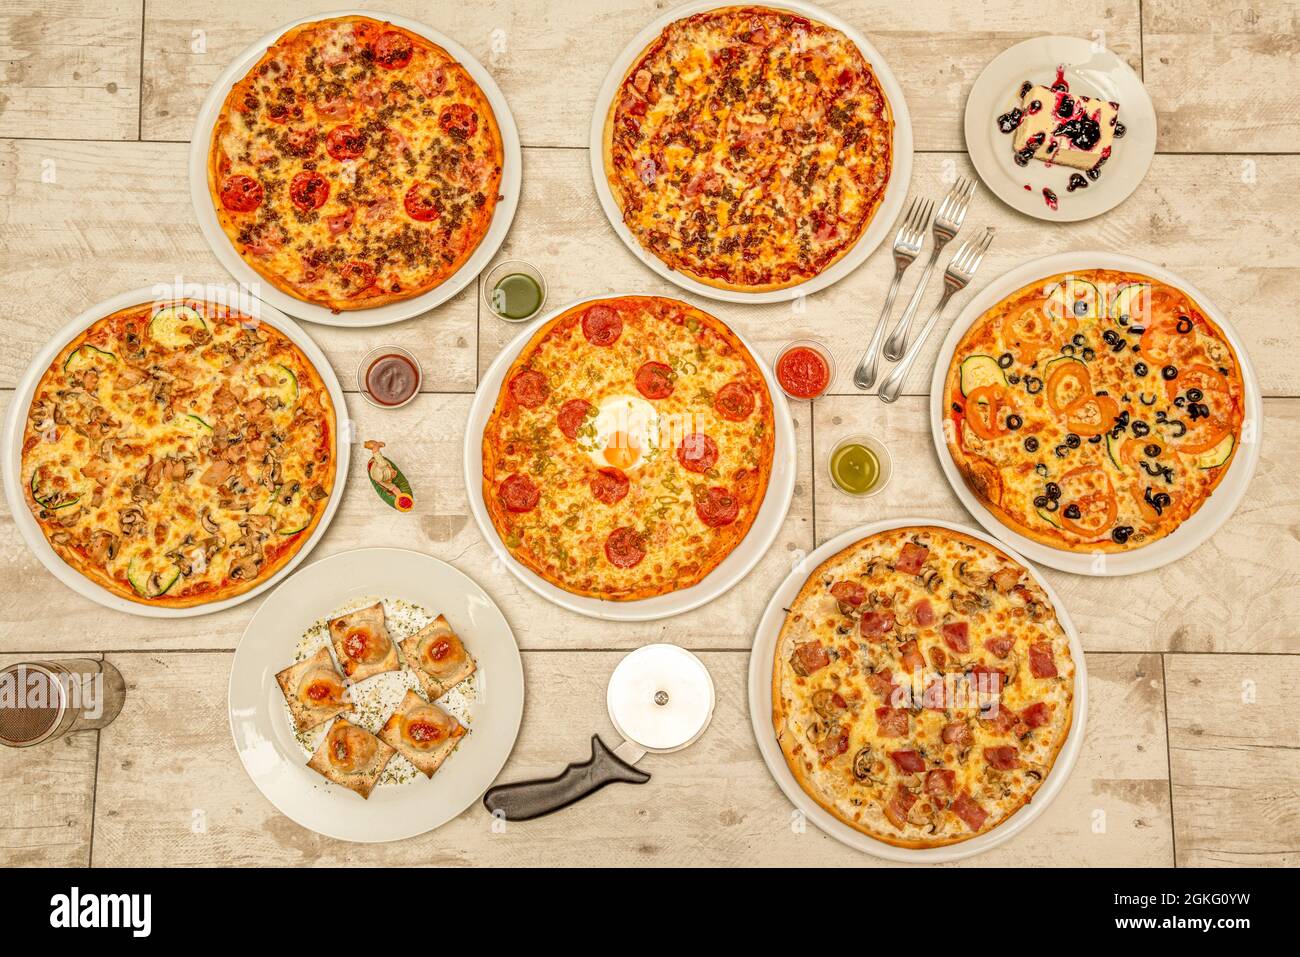 Assorted Pizzas High Resolution Stock Photography and Images - Alamy